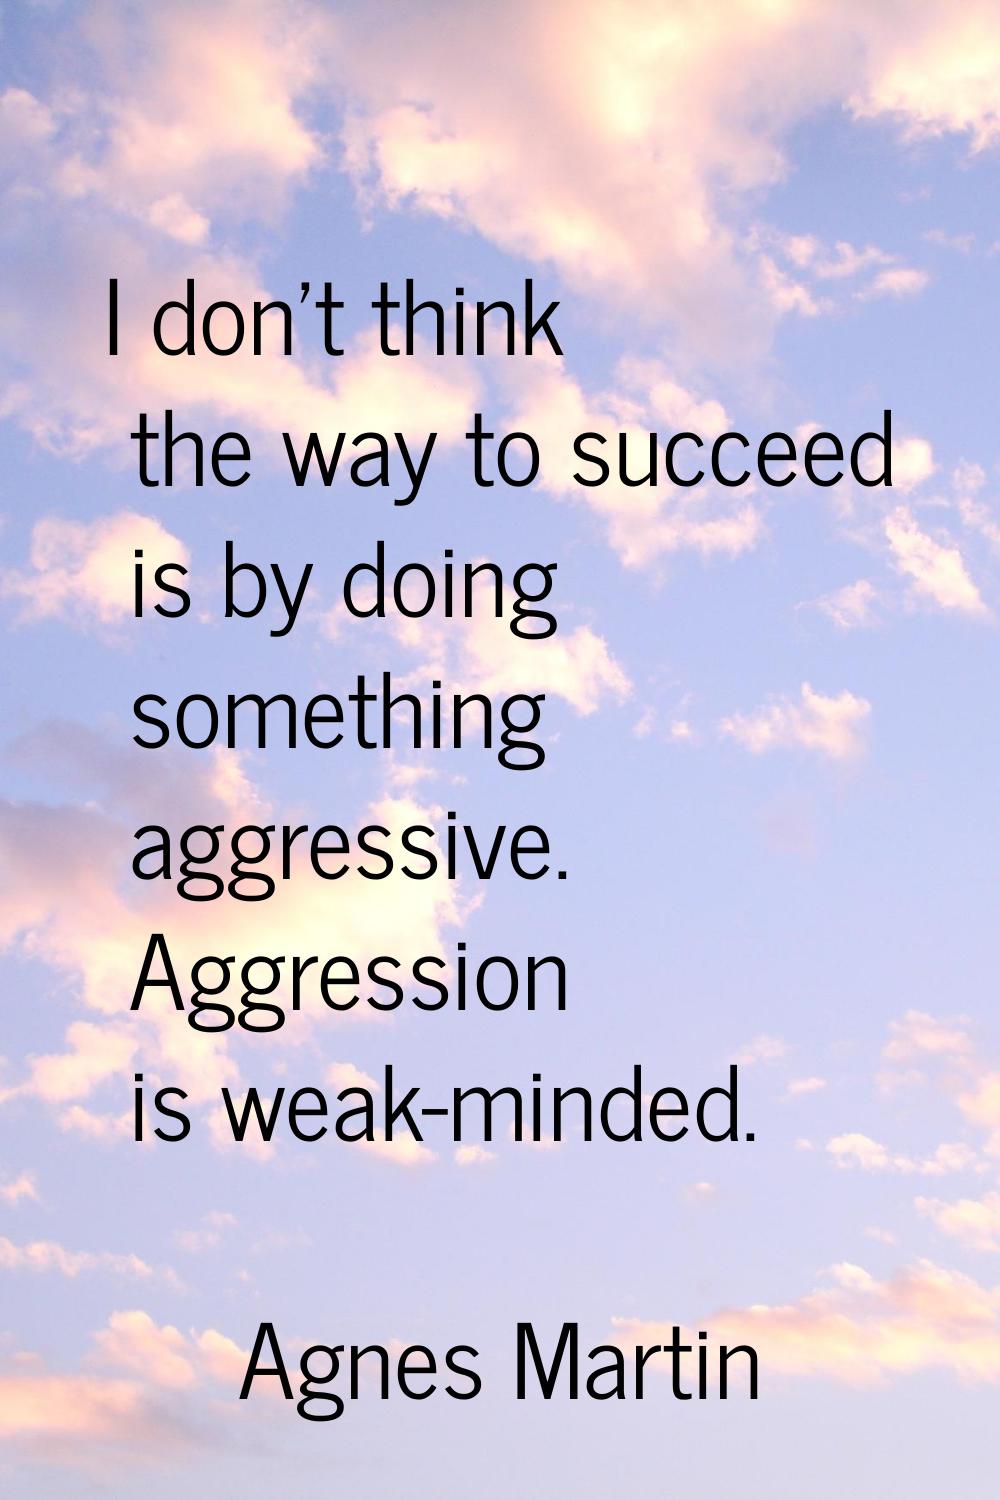 I don't think the way to succeed is by doing something aggressive. Aggression is weak-minded.